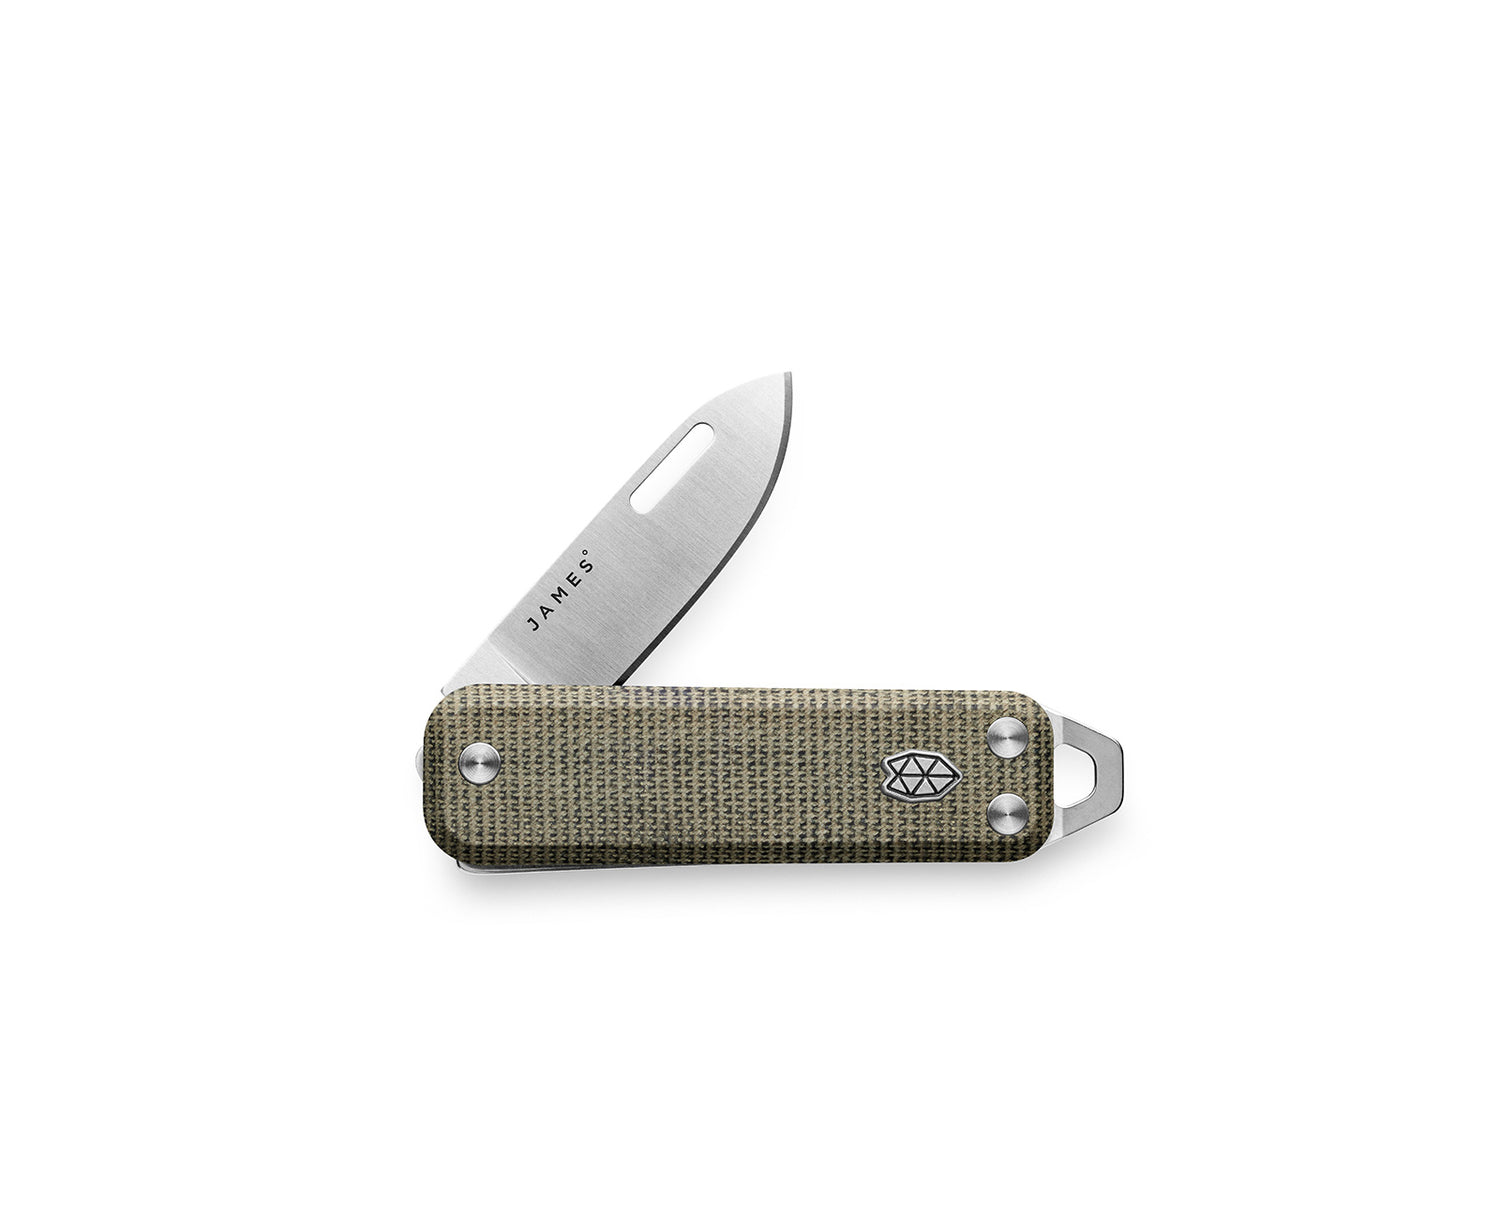 The Elko knife with OD green handle and stainless steel blade.